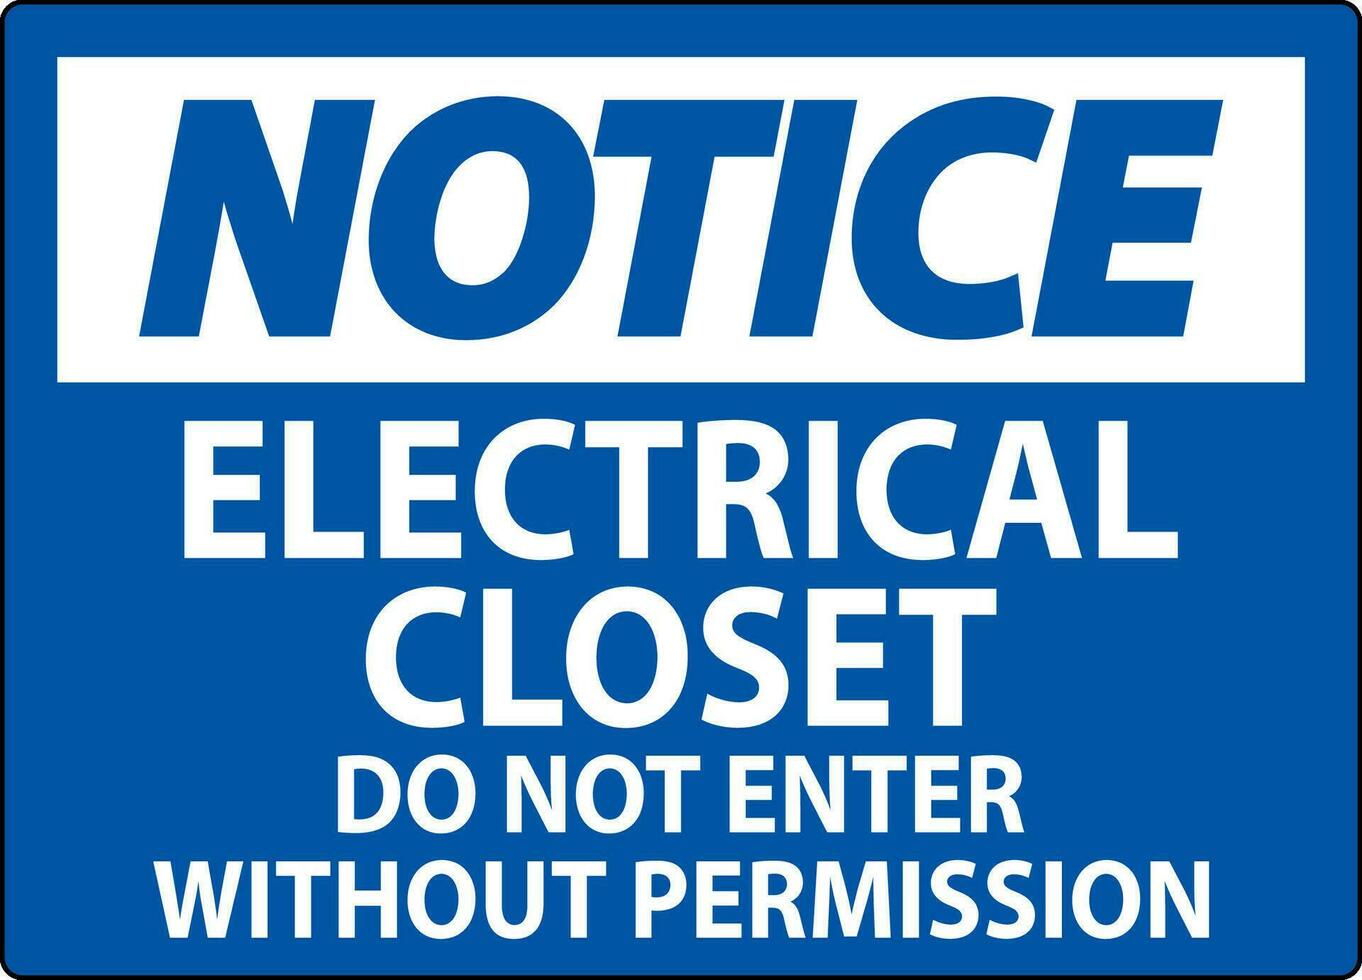 Notice Sign Electrical Closet - Do Not Enter Without Permission vector